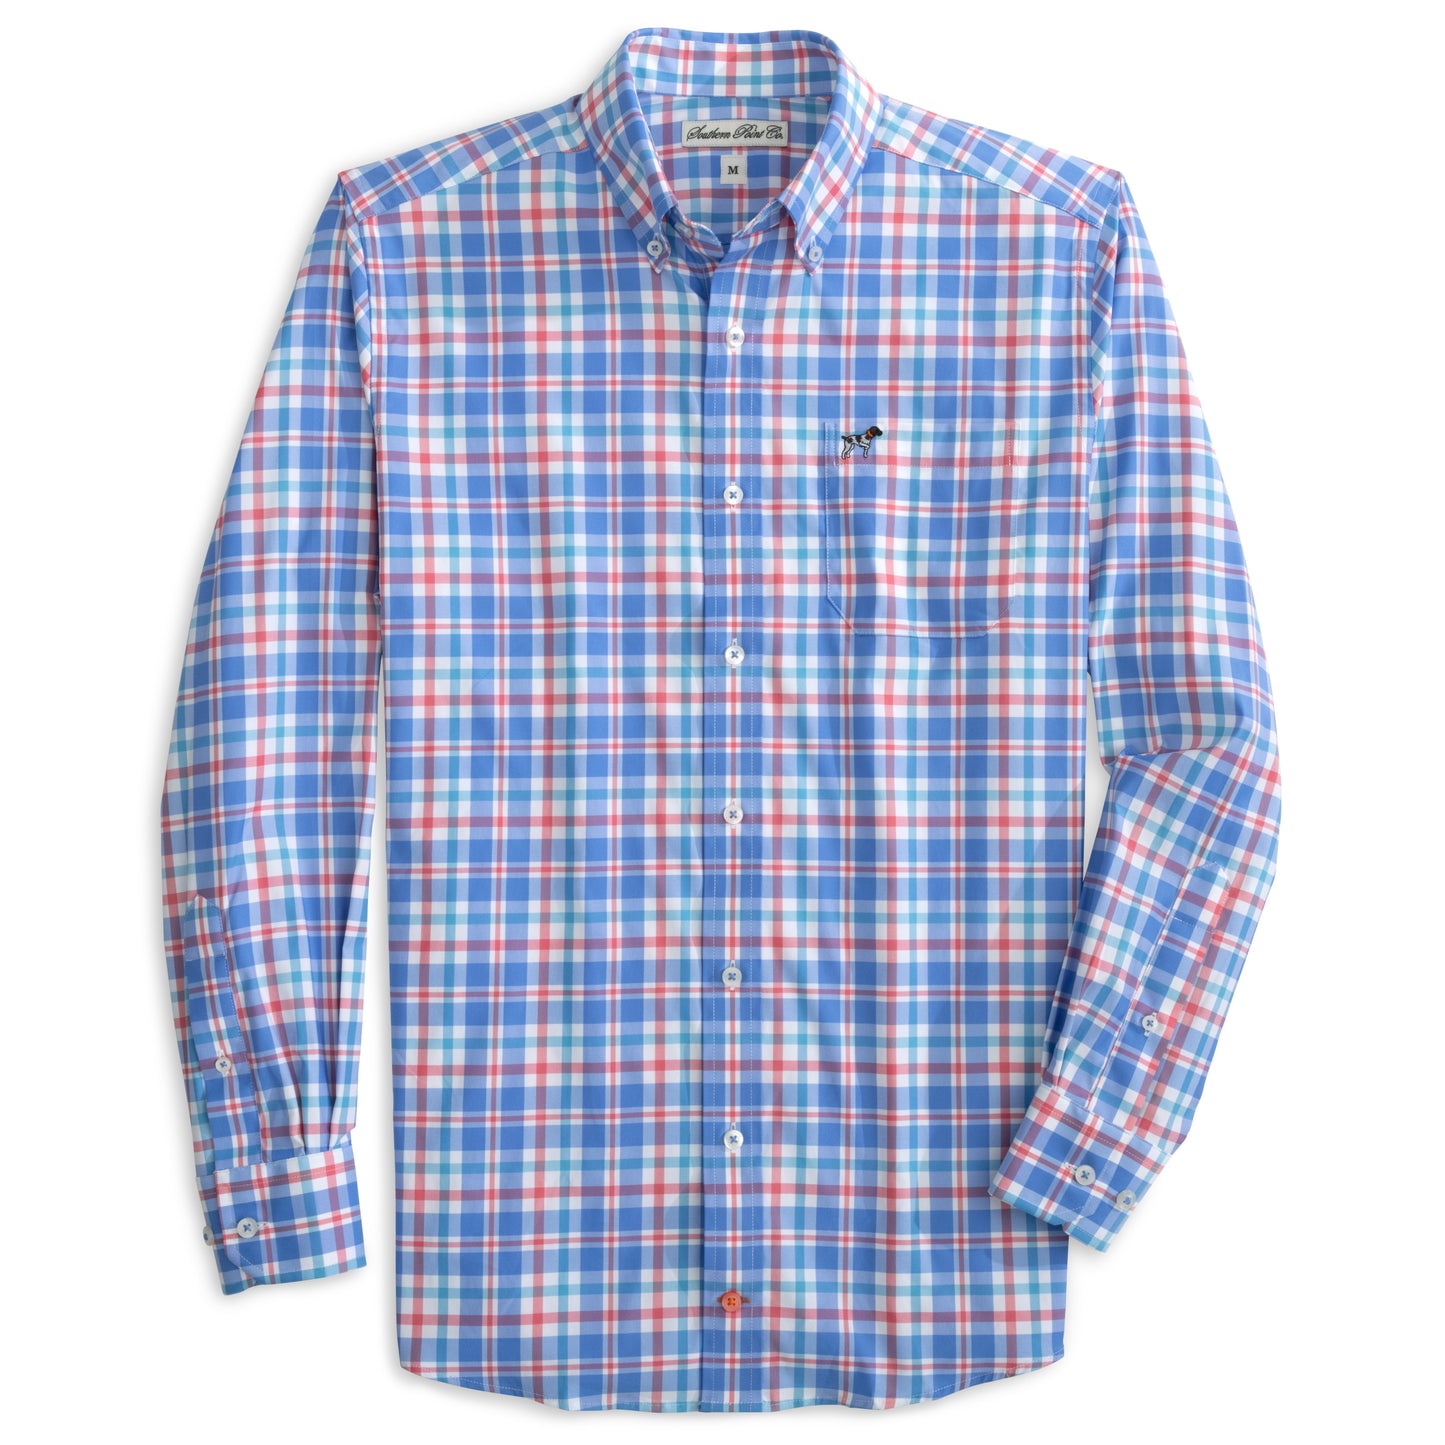 Southern Point Men's Long Sleeve Performance Fabric Long Sleeve Button Down Shirt